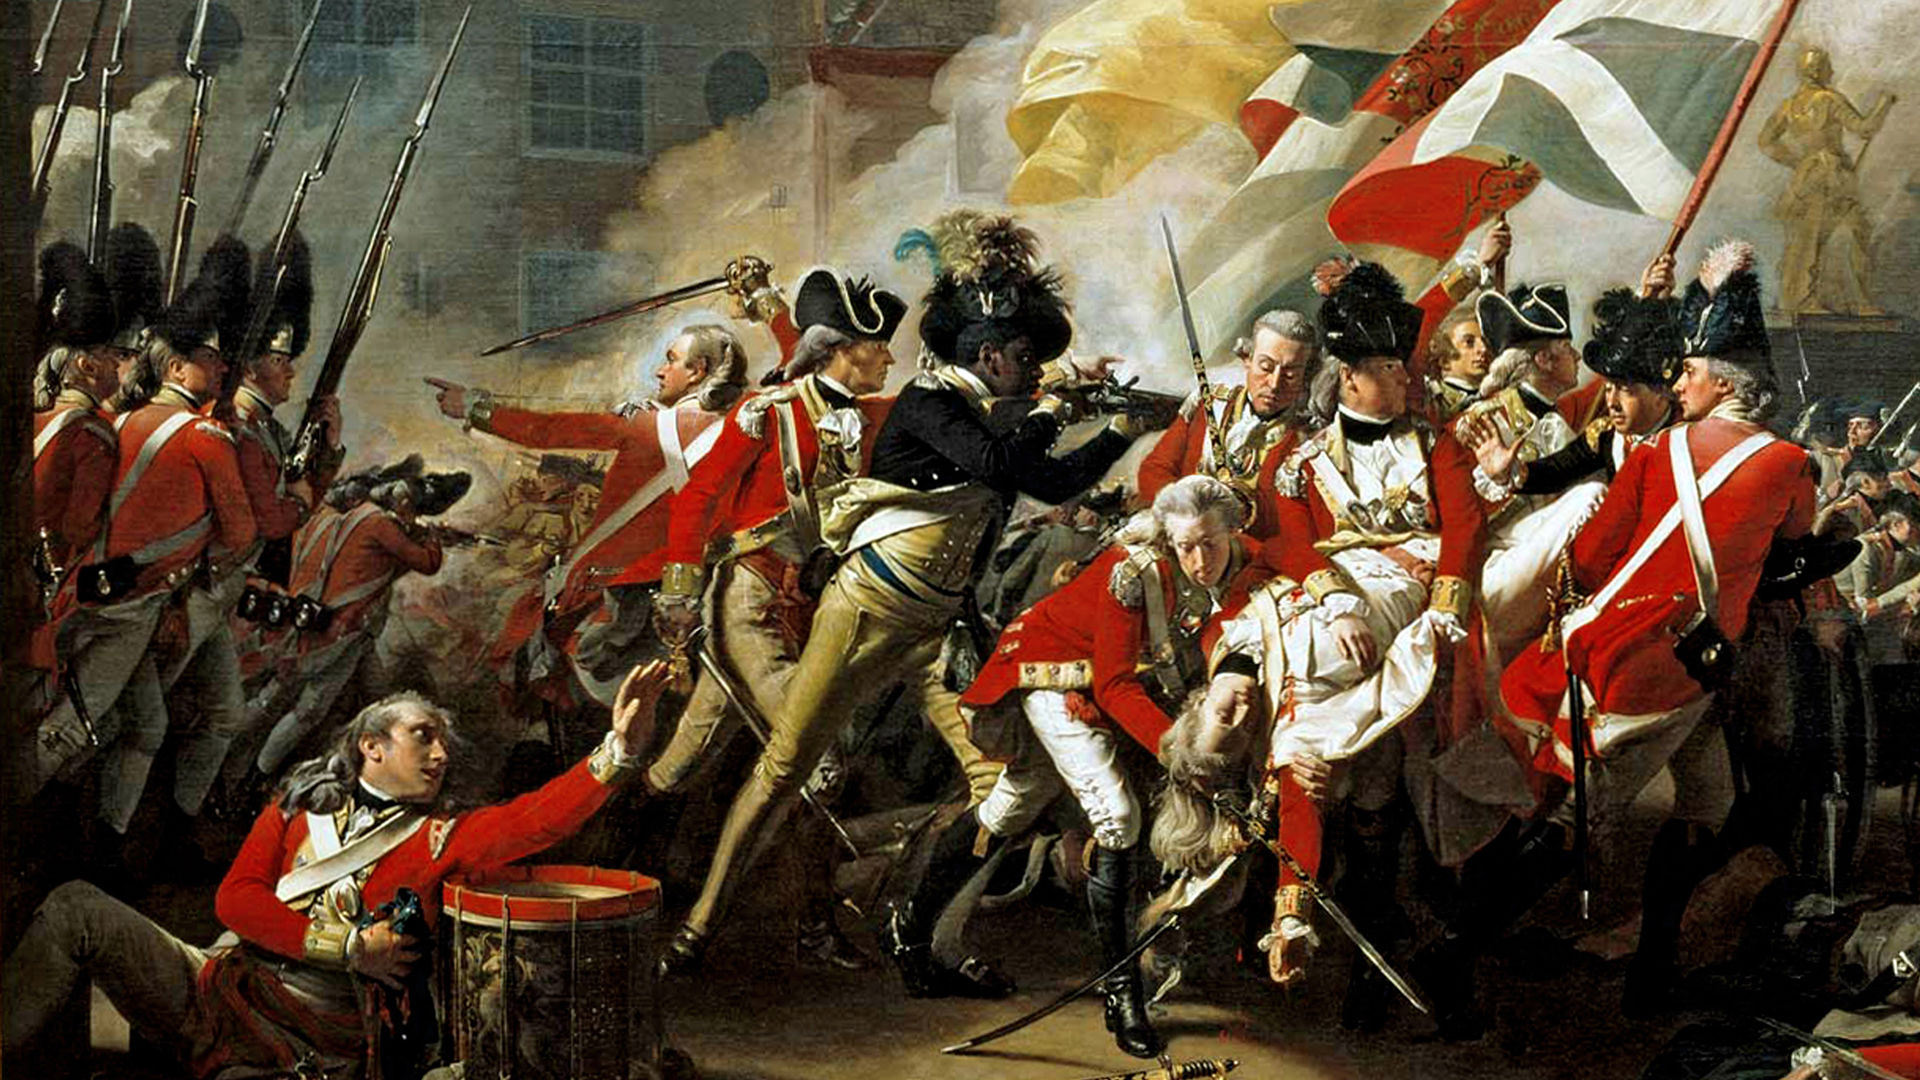 Read More: 7 Black Heroes of the American Revolution